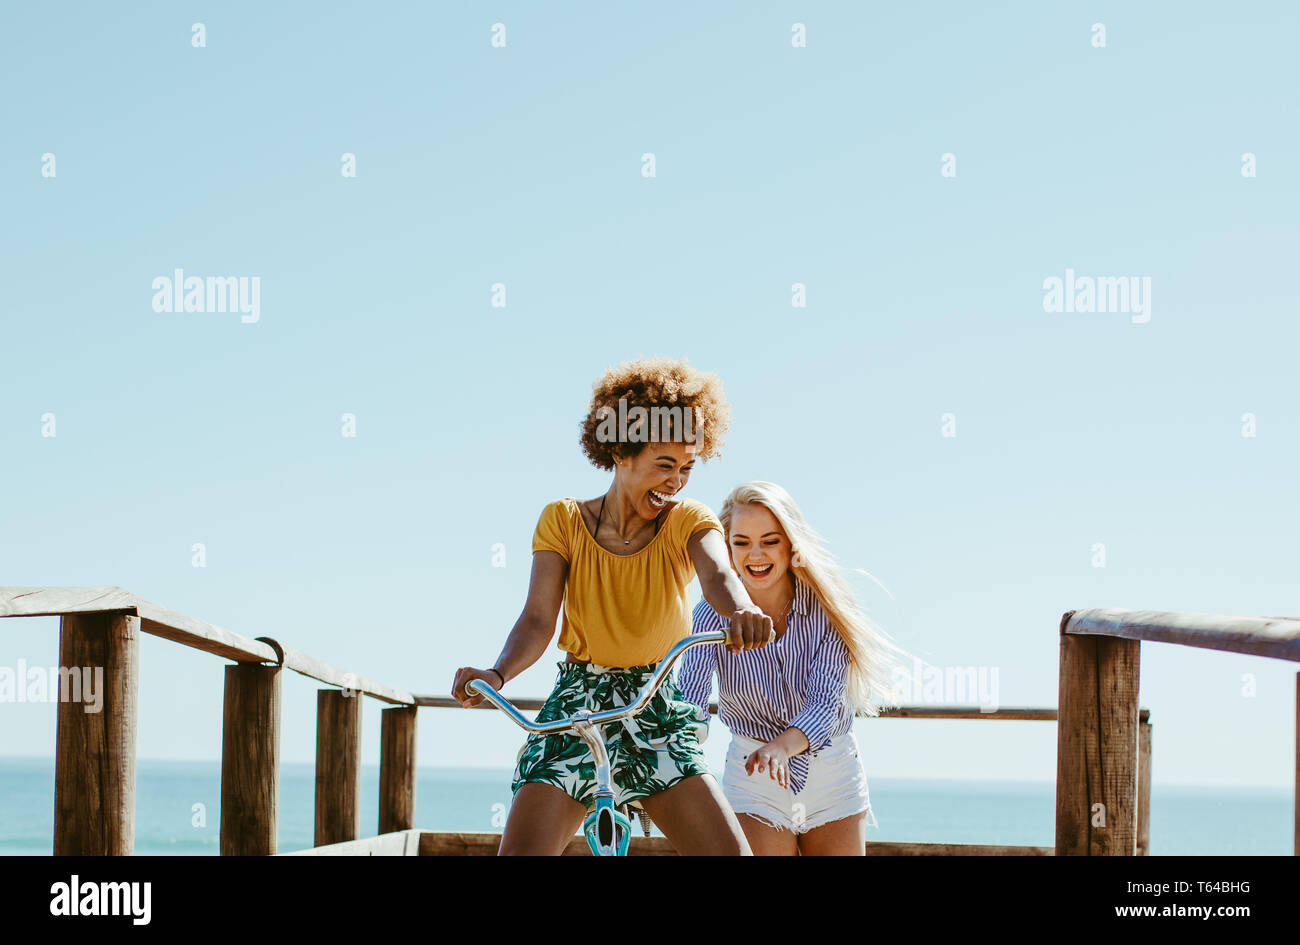 Two women friends playing with a bicycle on the boardwalk along the sea. Woman sitting on the bike with her friends pushing from the back and smiling. Stock Photo